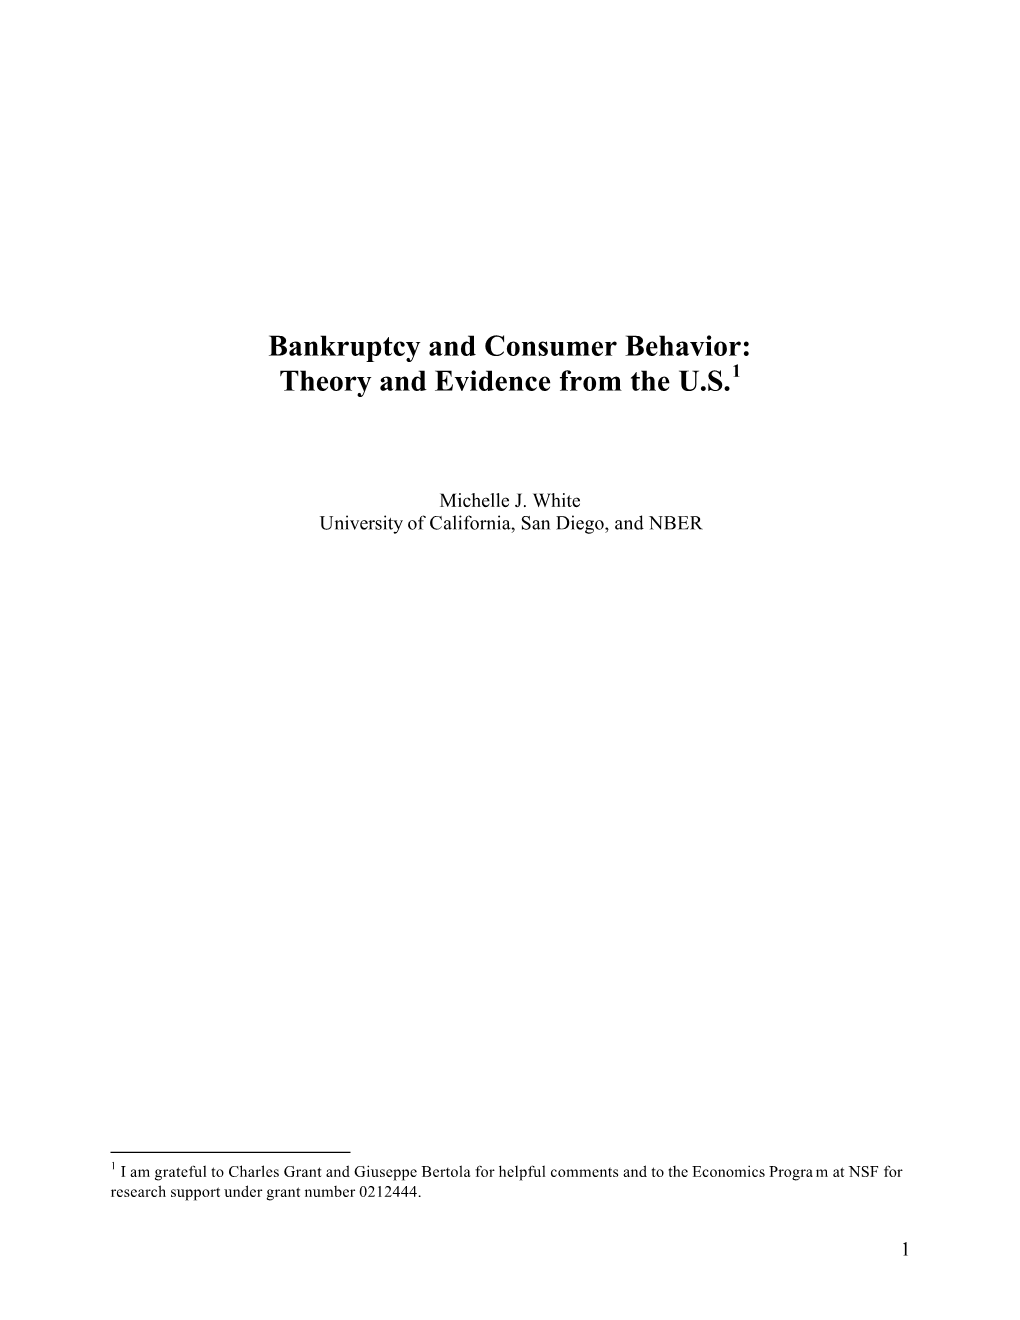 Bankruptcy and Consumer Behavior: Theory and Evidence from the U.S.1